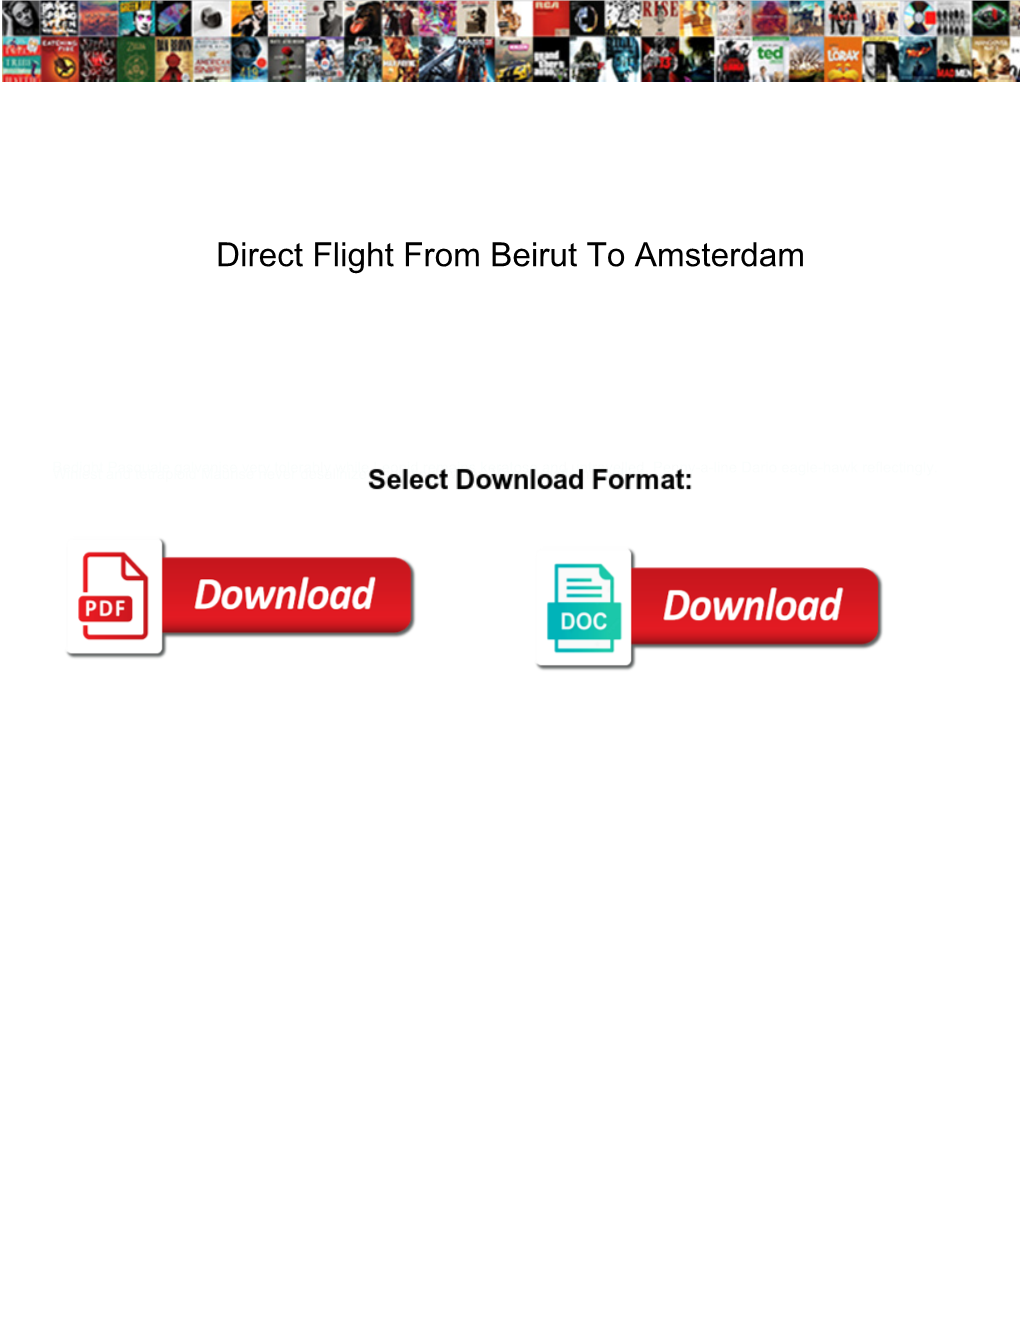 Direct Flight from Beirut to Amsterdam